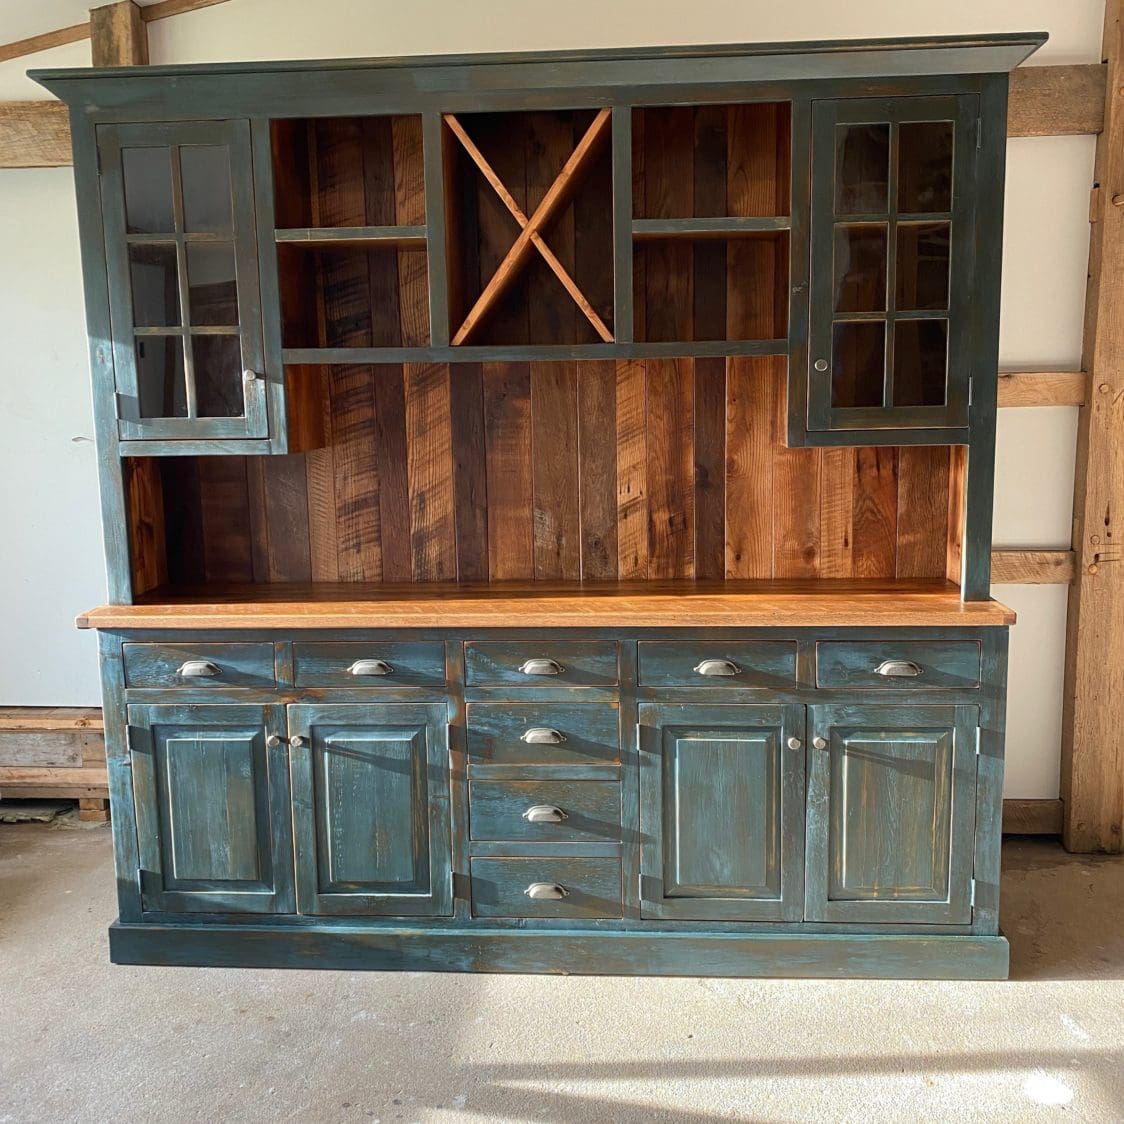 Large country hutch made in reclaimed wood